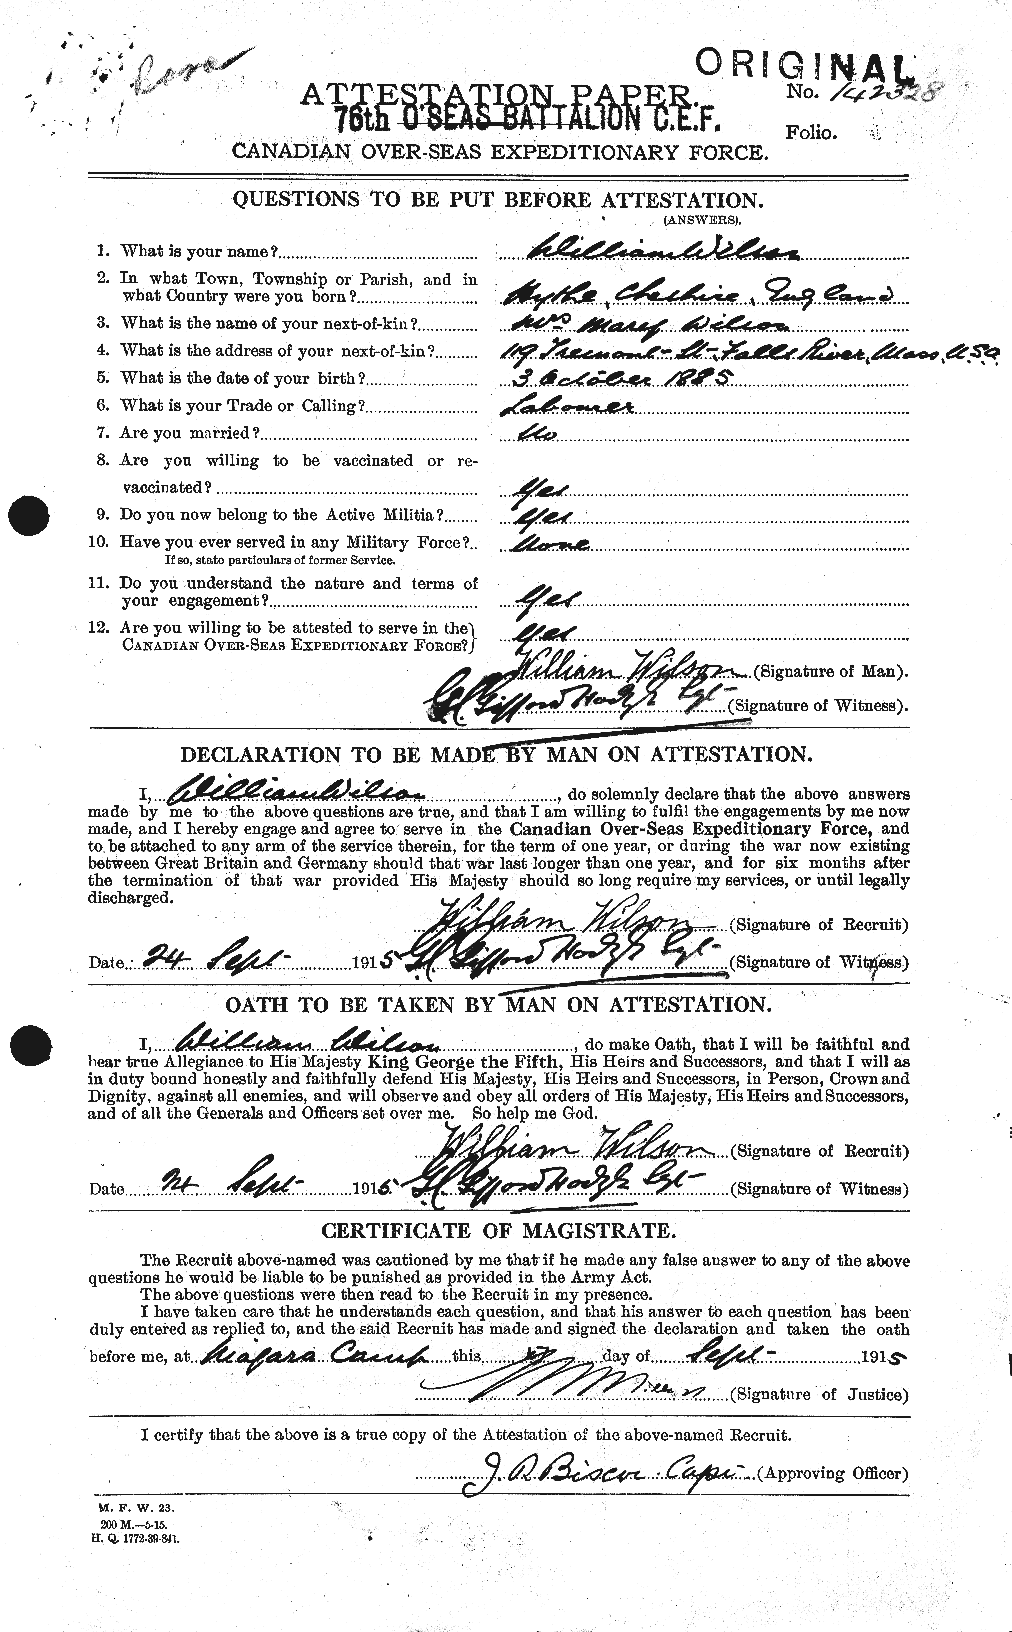 Personnel Records of the First World War - CEF 681826a